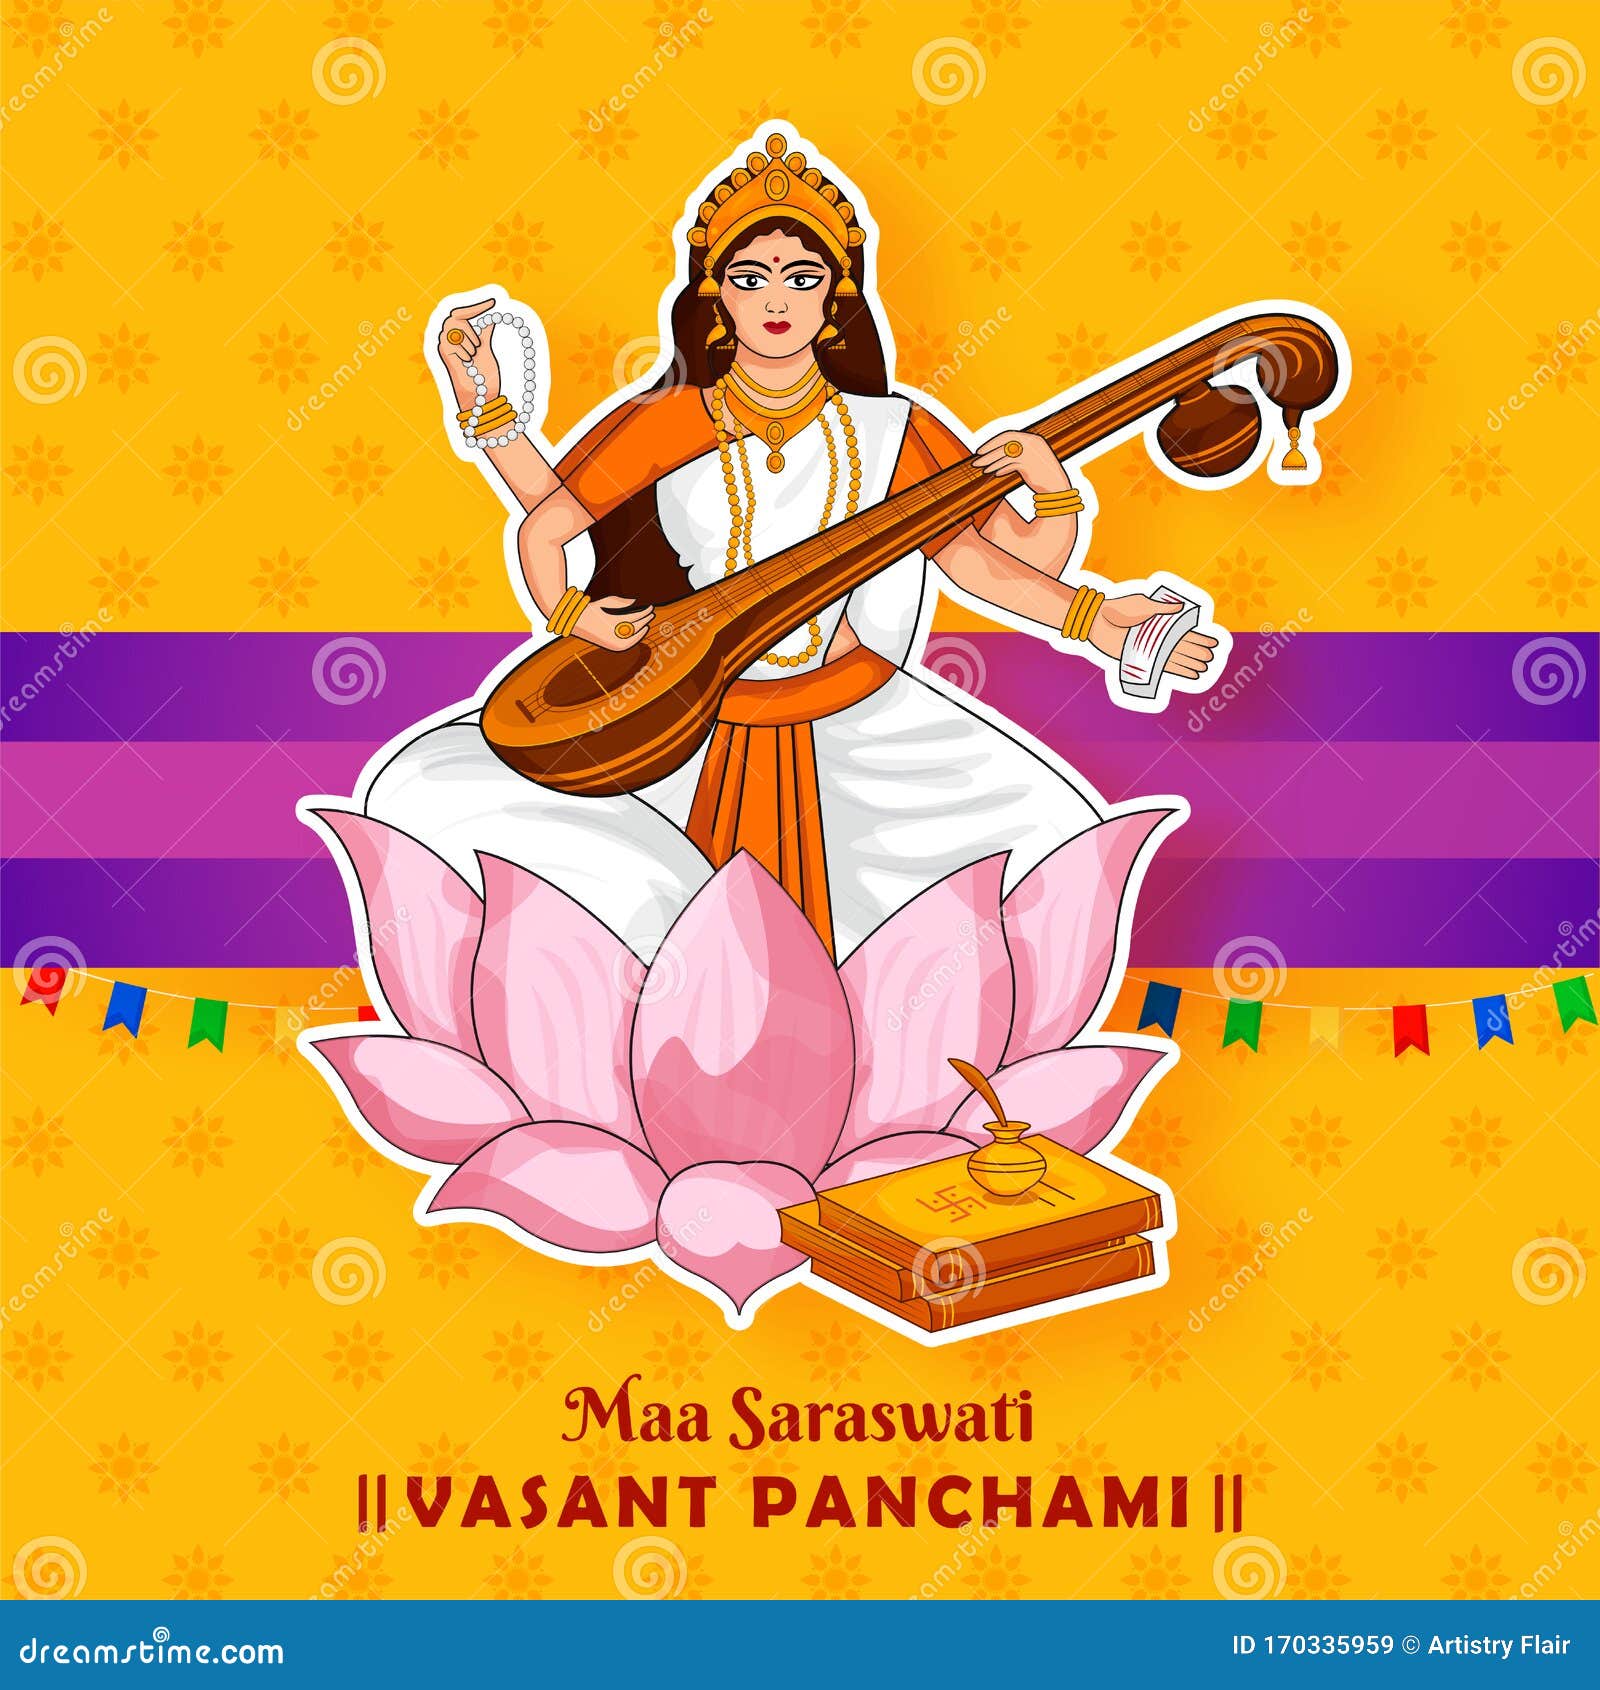 Happy Vasant Panchami Festival Background Wih Hindi Typography Meaning Wish  You A Very Happy Vasant Panchami Stock Illustration  Download Image Now   iStock